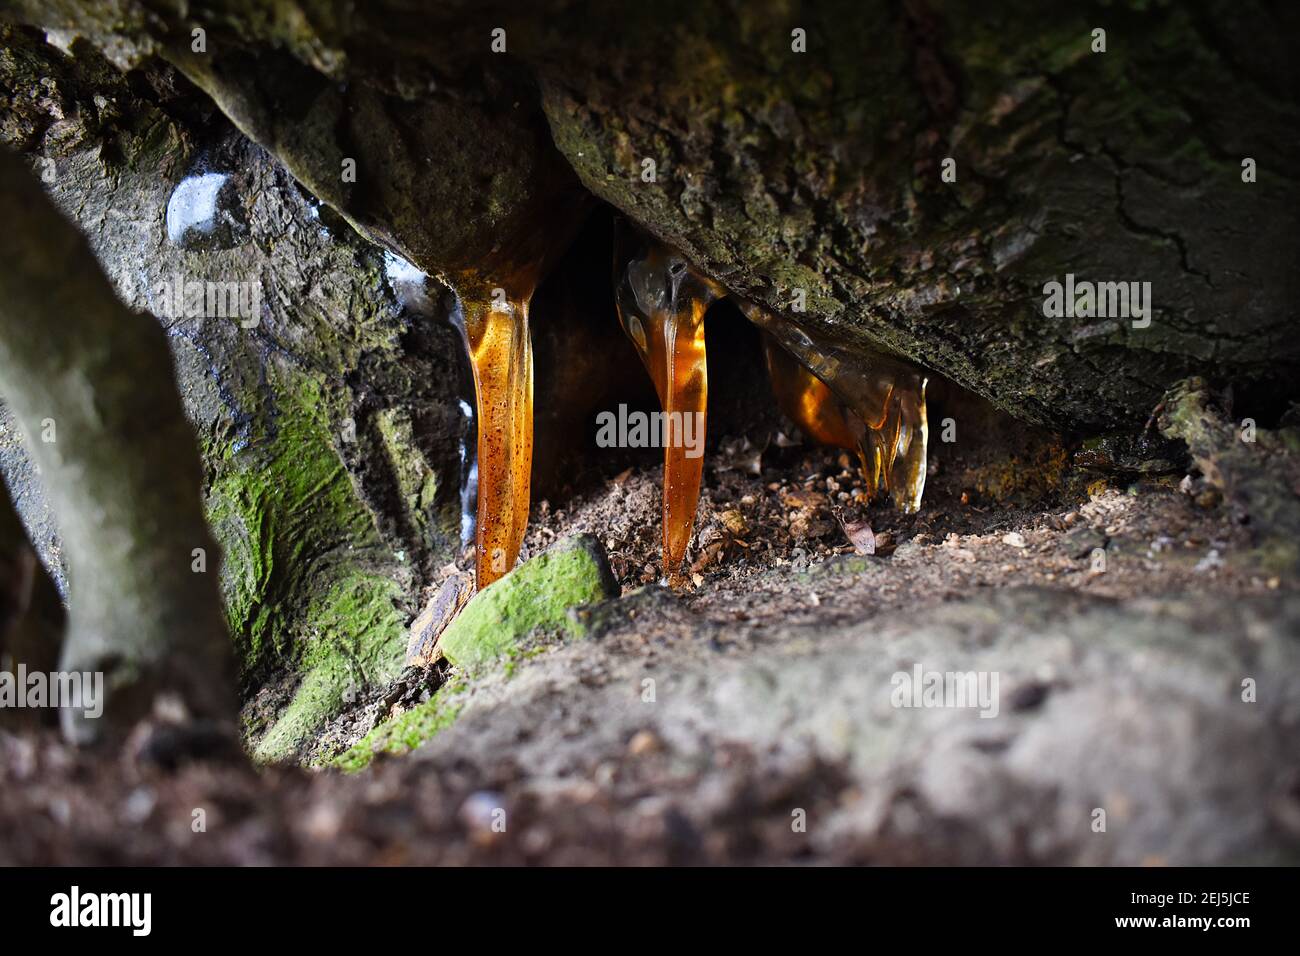 Resin leaking from underneath a tree takes the shape of icicles and are illuminated by sunlight. The amber coloured sapcicles are close to the floor. Stock Photo